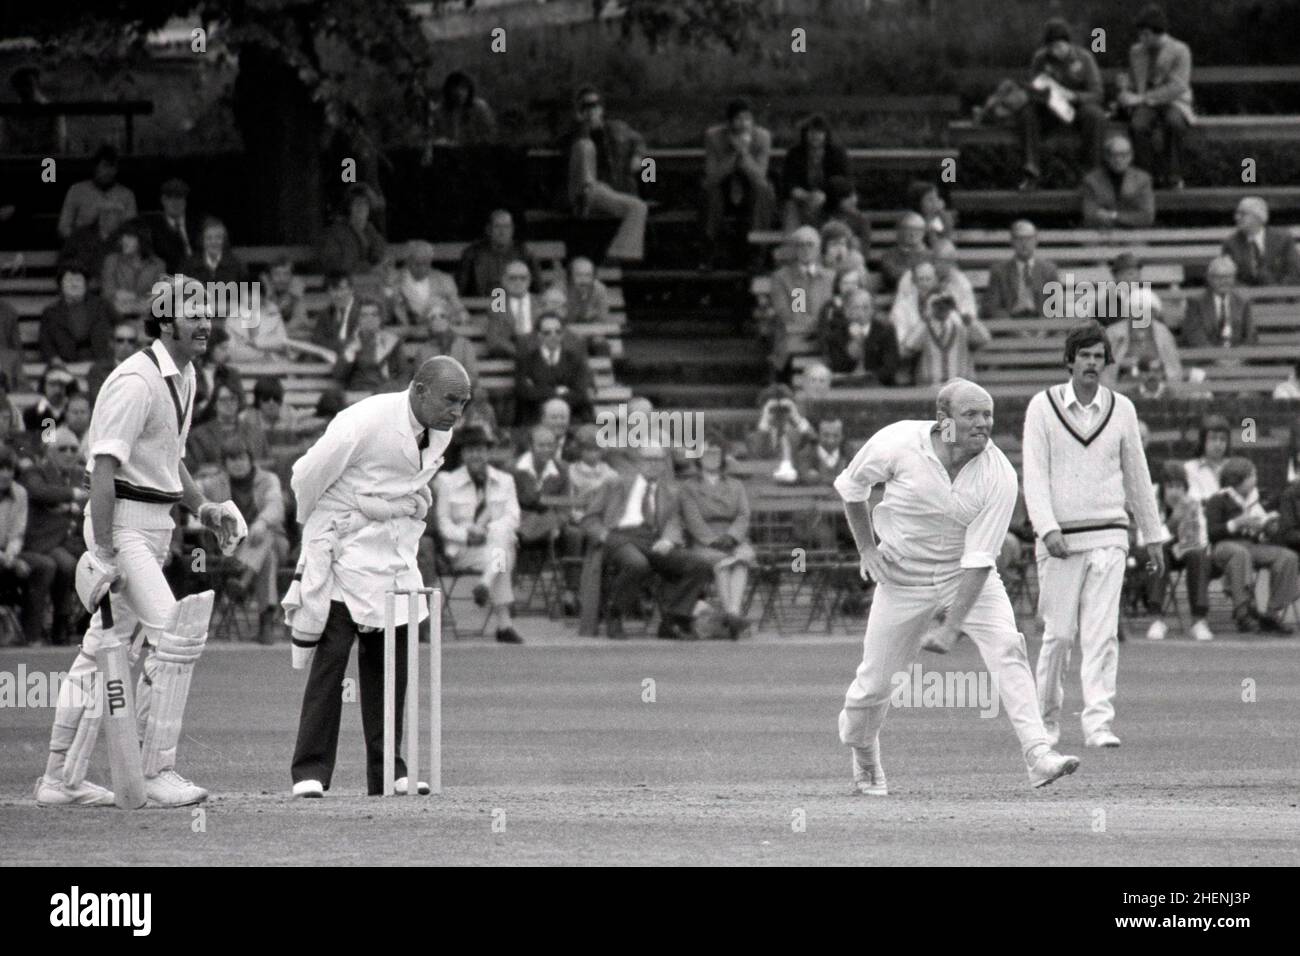 Fred Swarbrook bowling for Derbyshire, Derbyshire vs. Australians, Queens Park, Chesterfield, Derbyshire, England 29th,30th June & 1st July 1977. Non-striking batsman is Richie Robinson (Aus.) Geoff Miller is on the right, in front of pavilion. Umpire is “Sam” Cook. Stock Photo